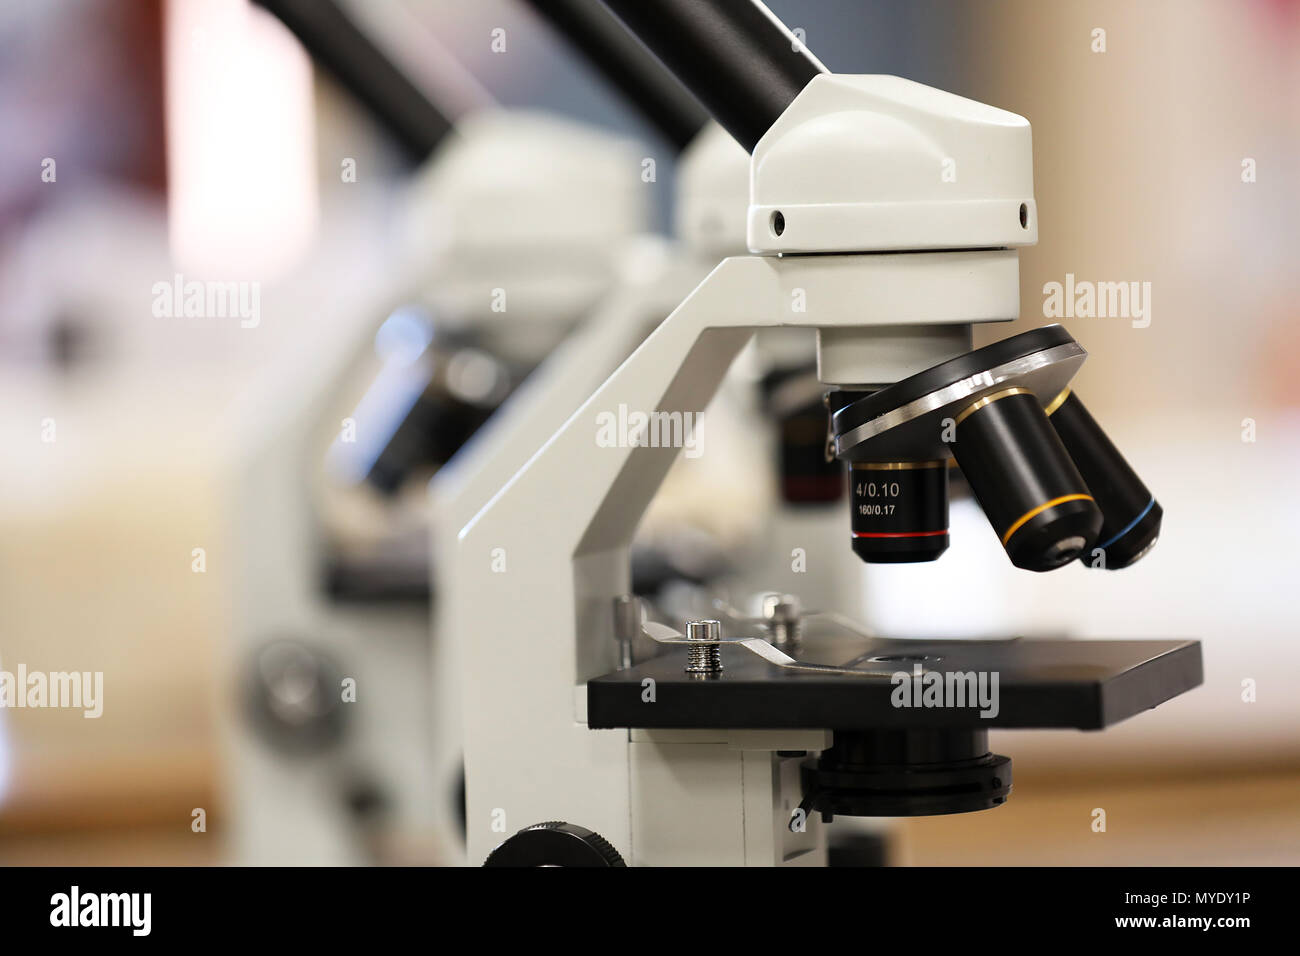 close up of a pair of electronic microscopes in a science classroom or laboratory research facility. knowledge, medicine, pathology, medical concept. Stock Photo